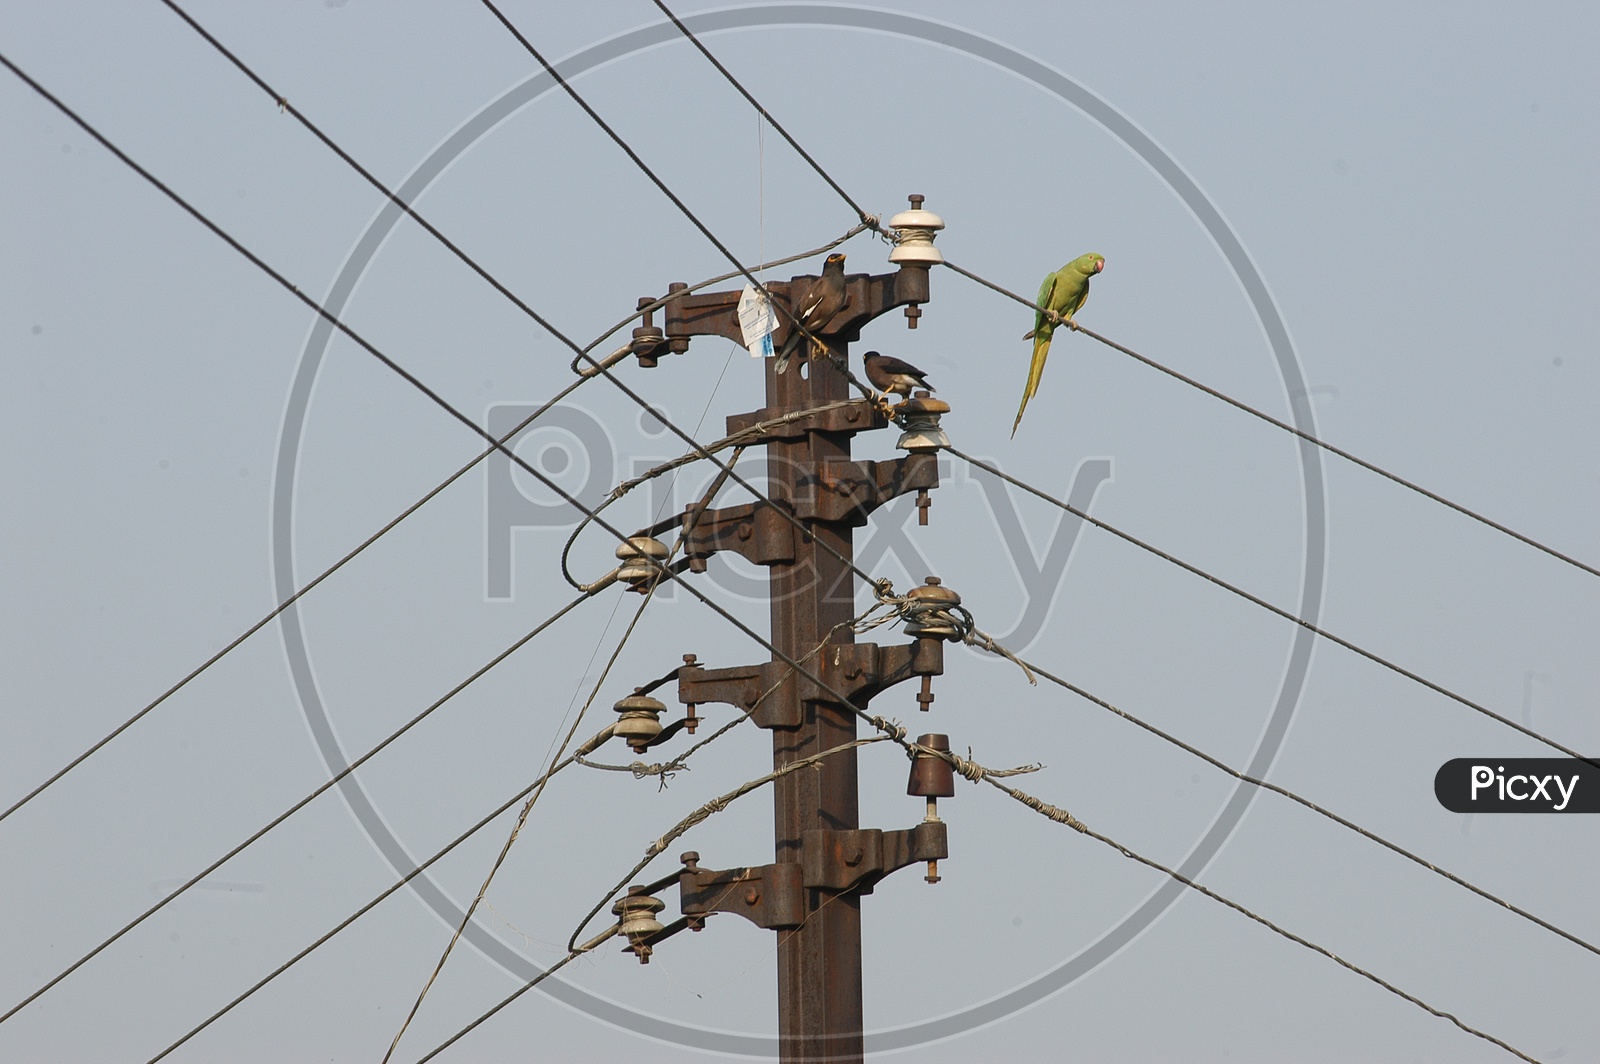 A parrot on a power transmission line